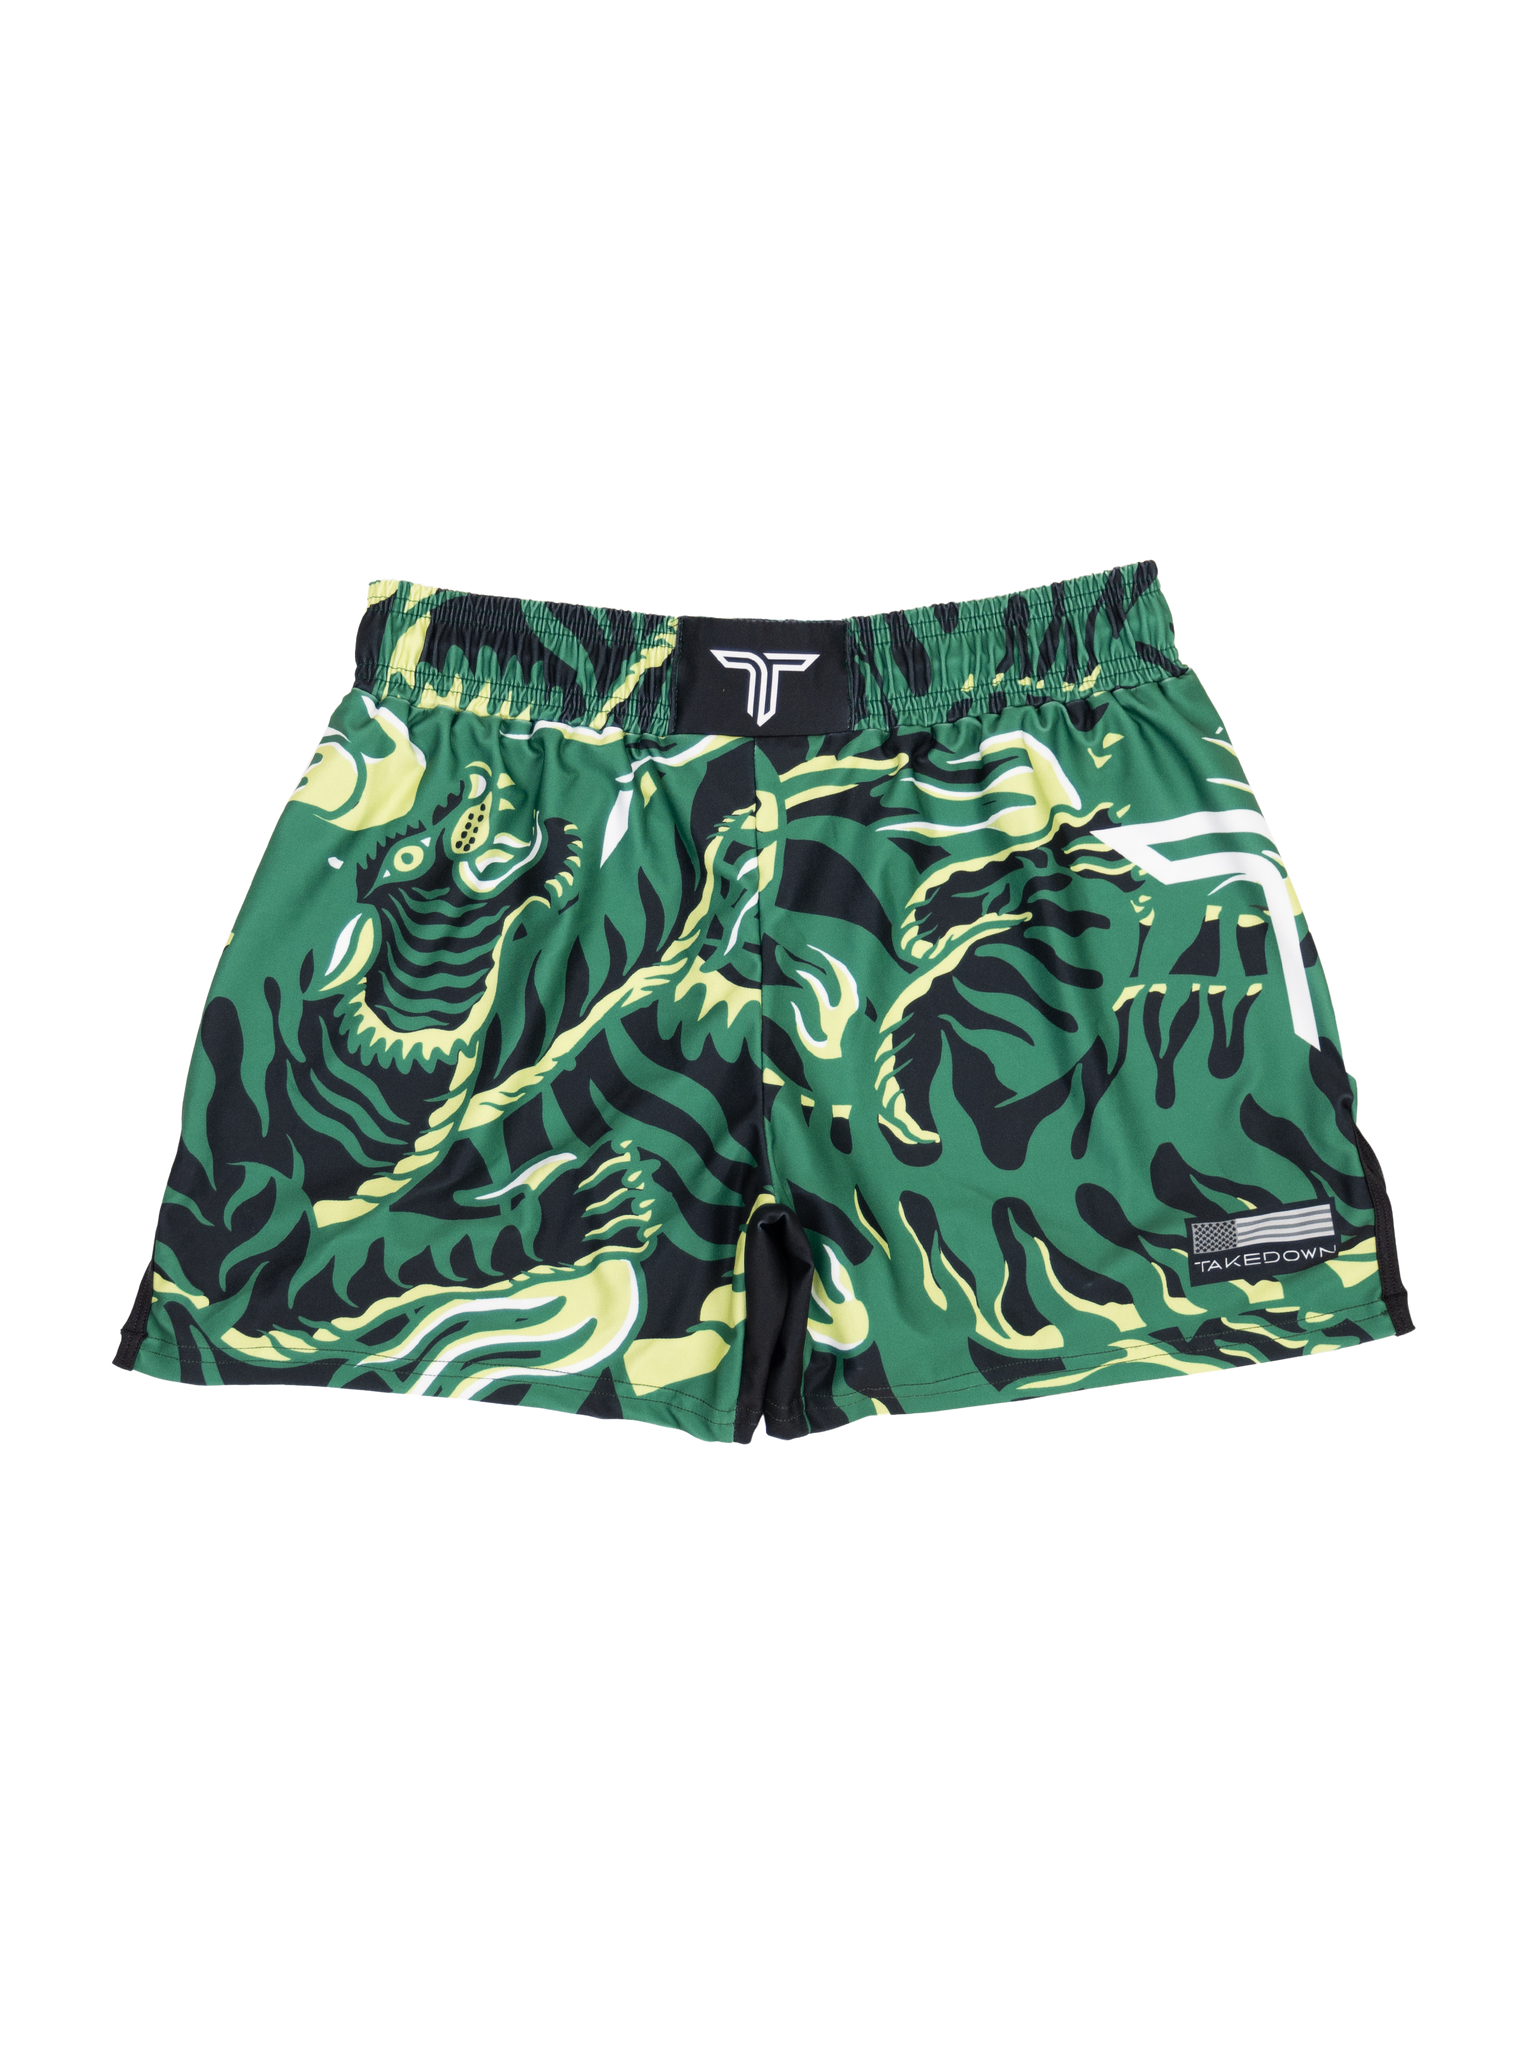 'Tiger Fight' Women's Fight Shorts - Bamboo Green (3"& 5" Inseam)